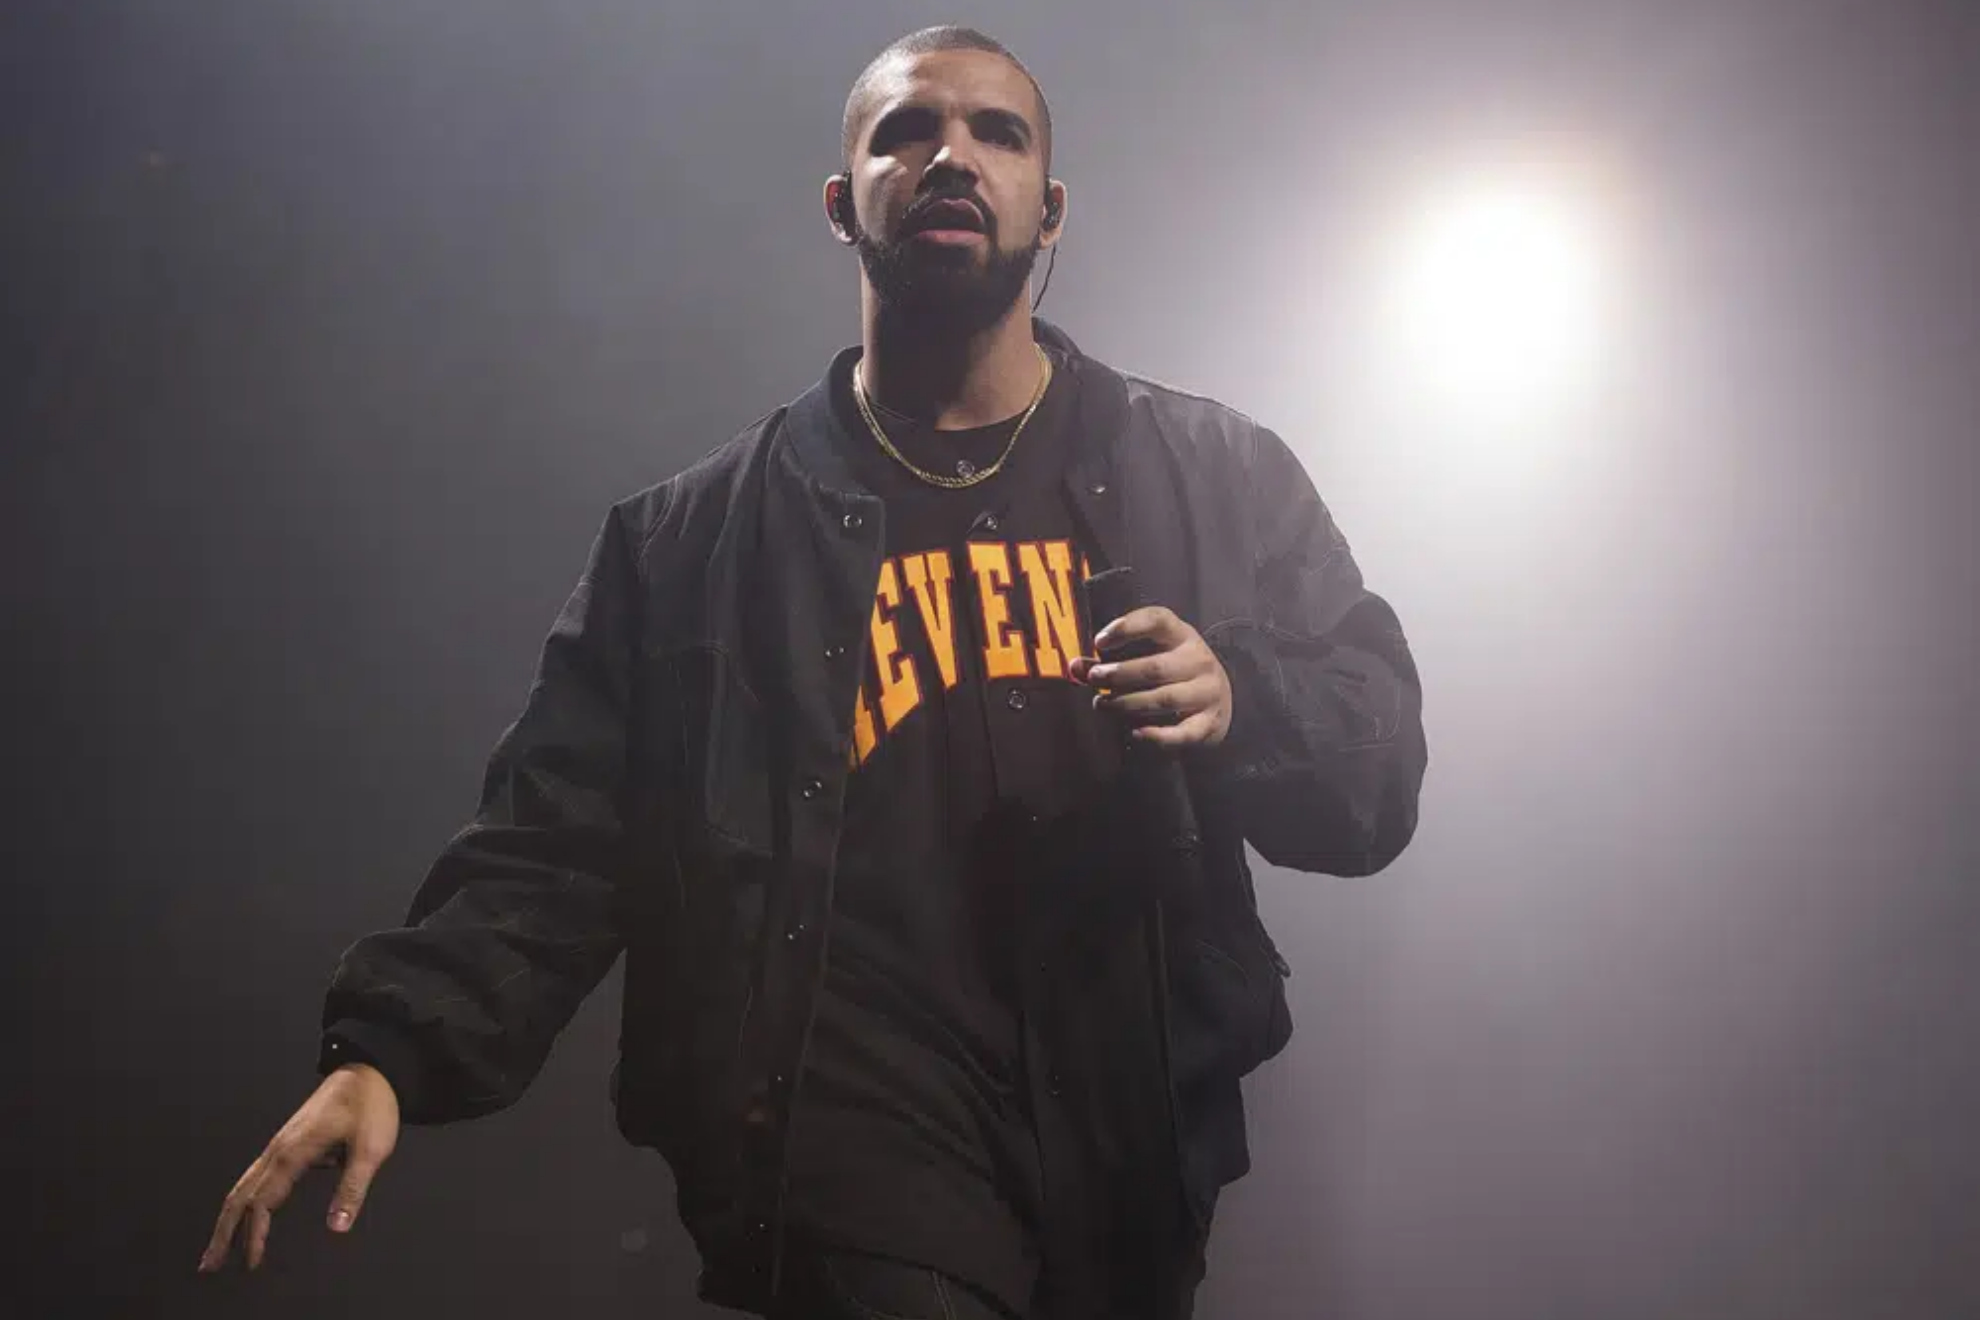 Drake place nearly $1 million dollars in bets for the Super Bowl.